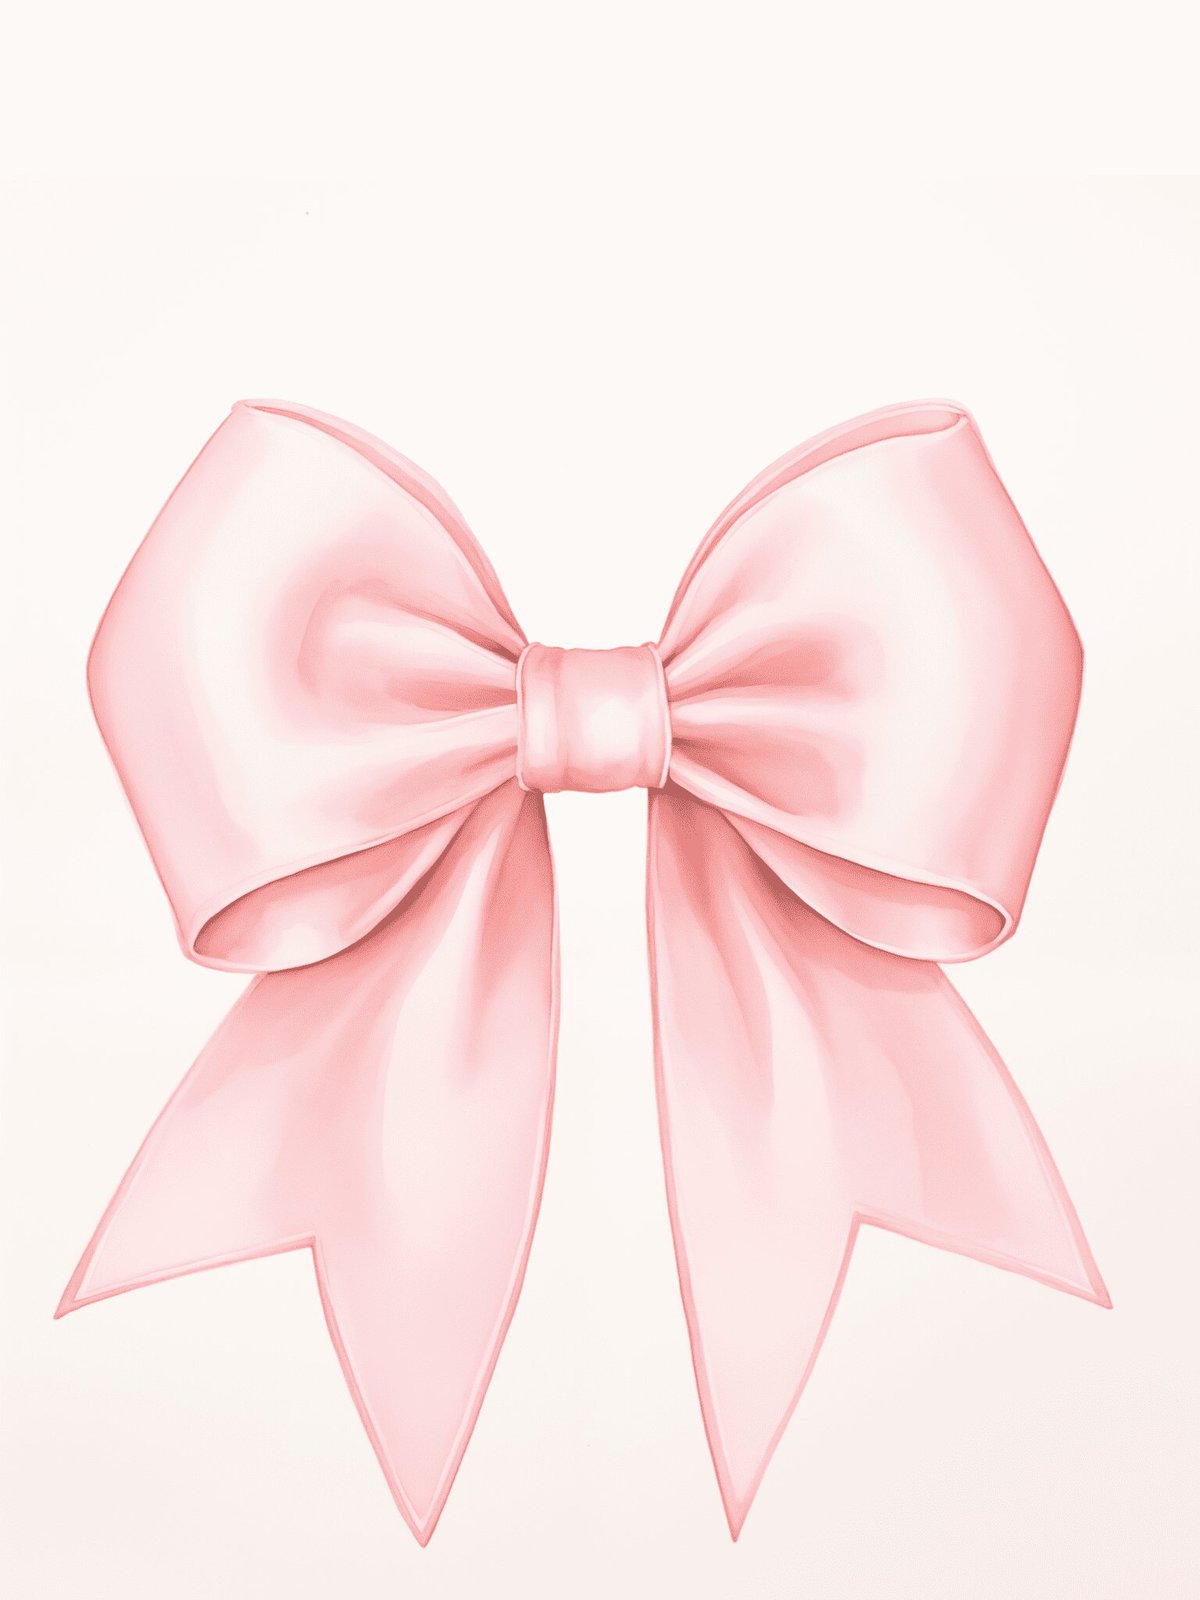 pencil drawing of a pink bow